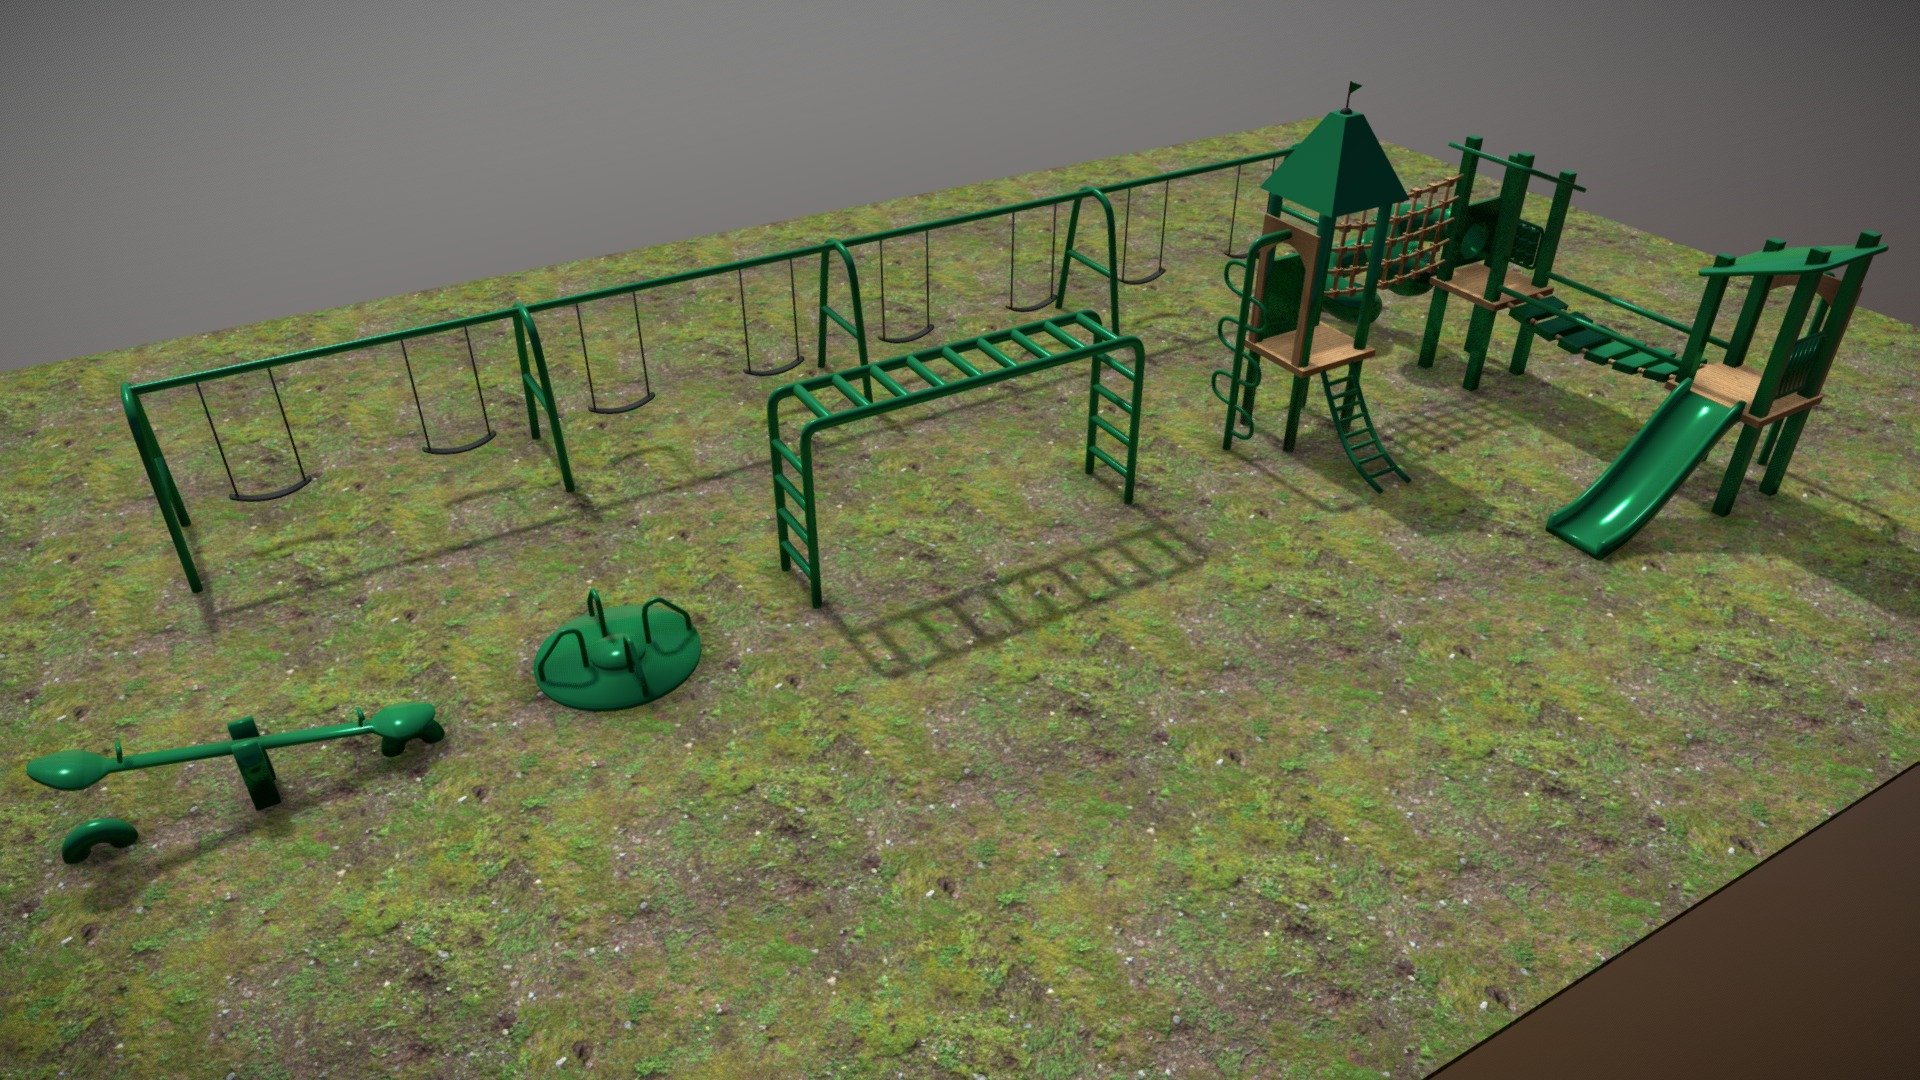 A playground modeled and textured in Blender. Can be used easily as a Game Prop/Asset 3d model